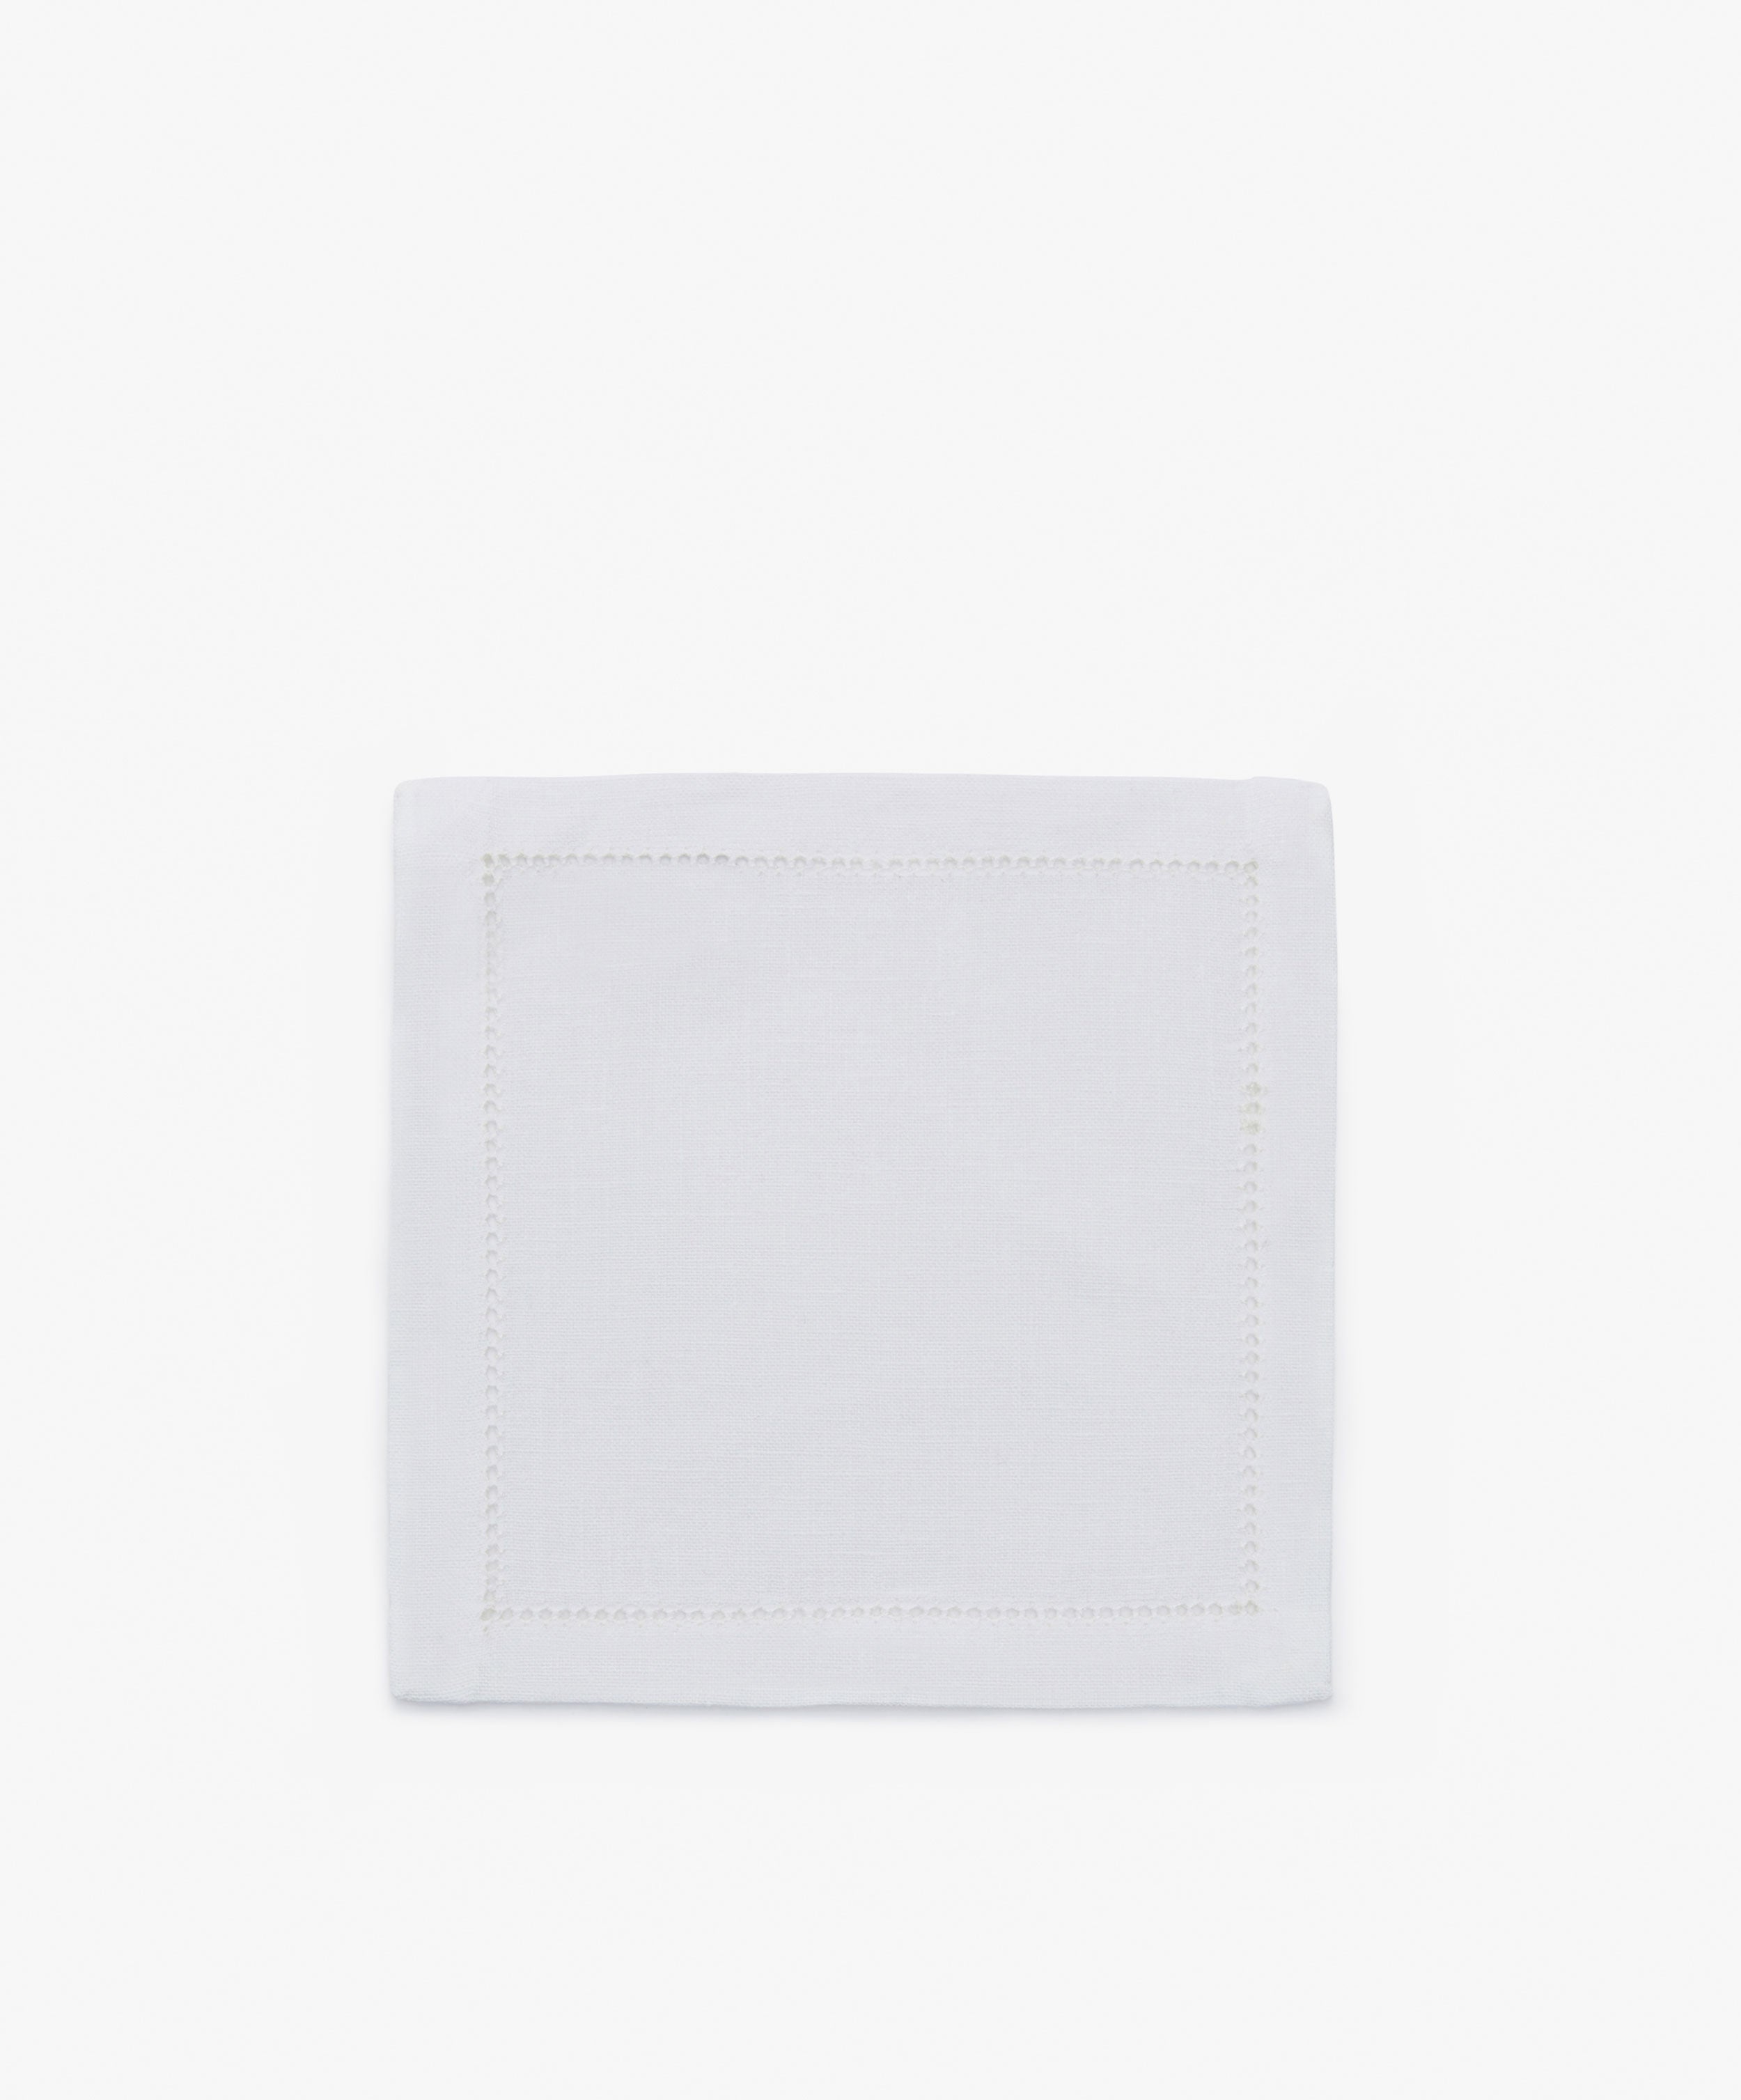 White Linen Napkin with Silver Contrast Hemstitch